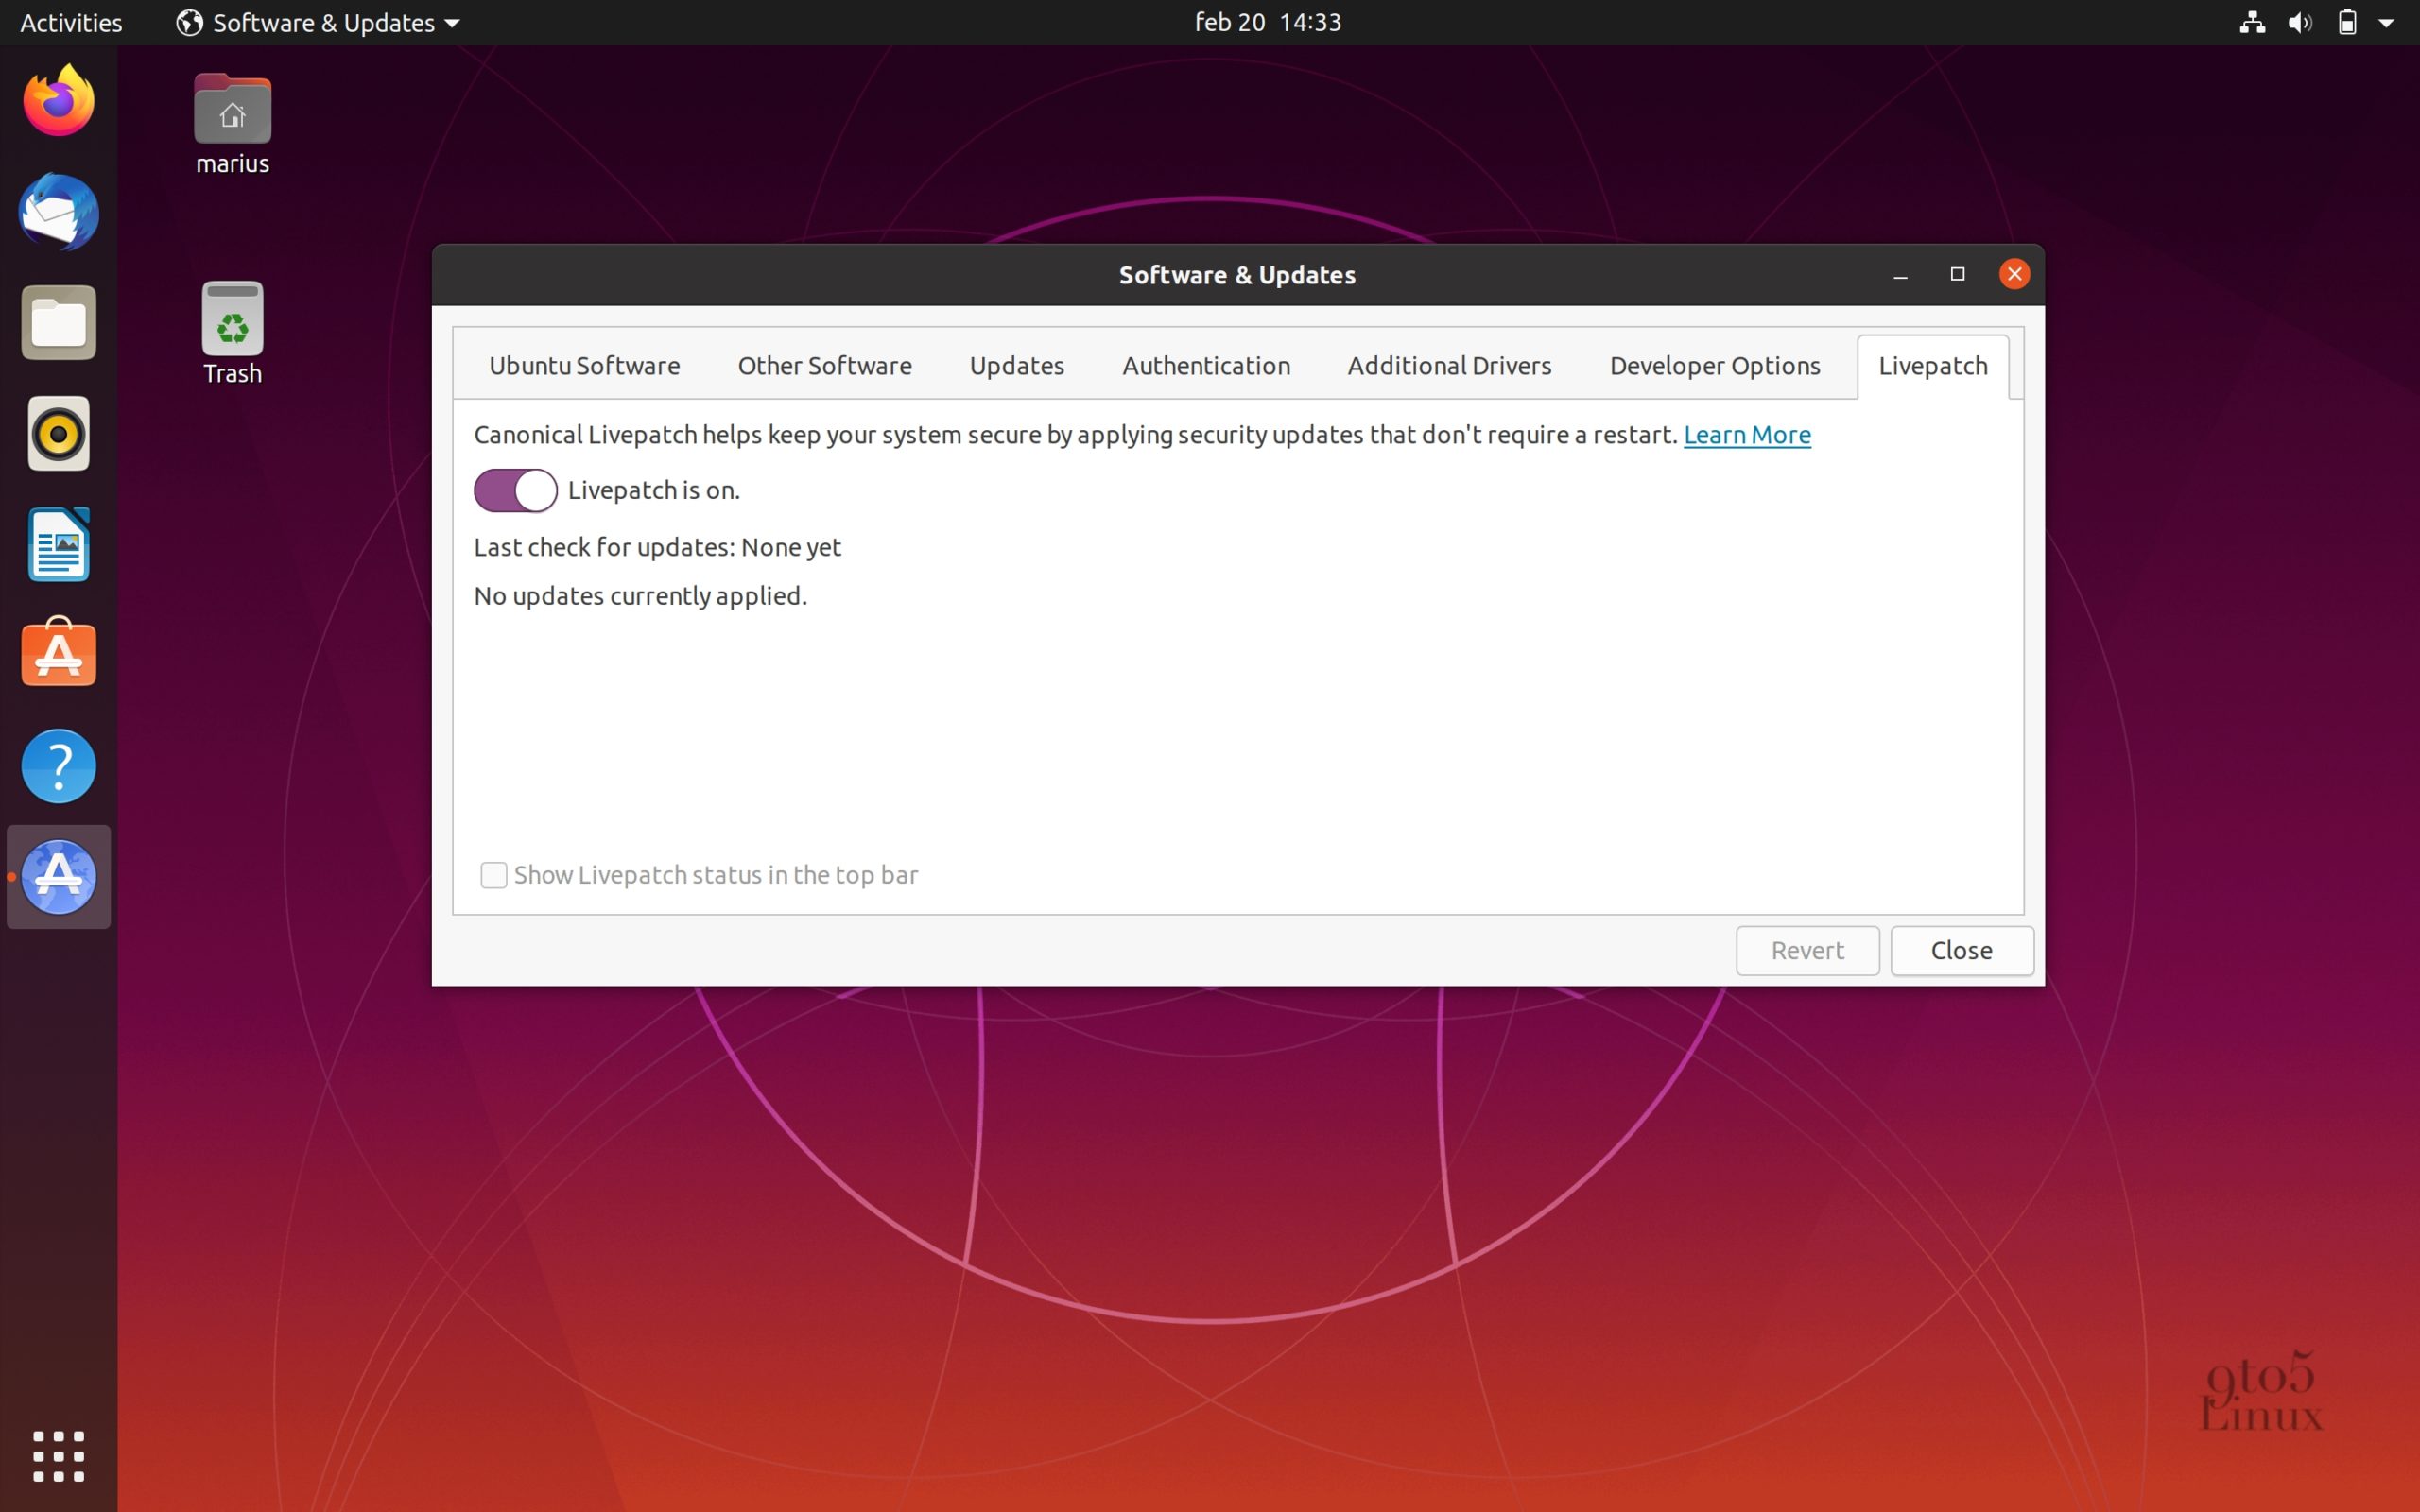 Kernel Live Patch Security Update Available for Ubuntu 18.04 LTS and 16.04 LTS